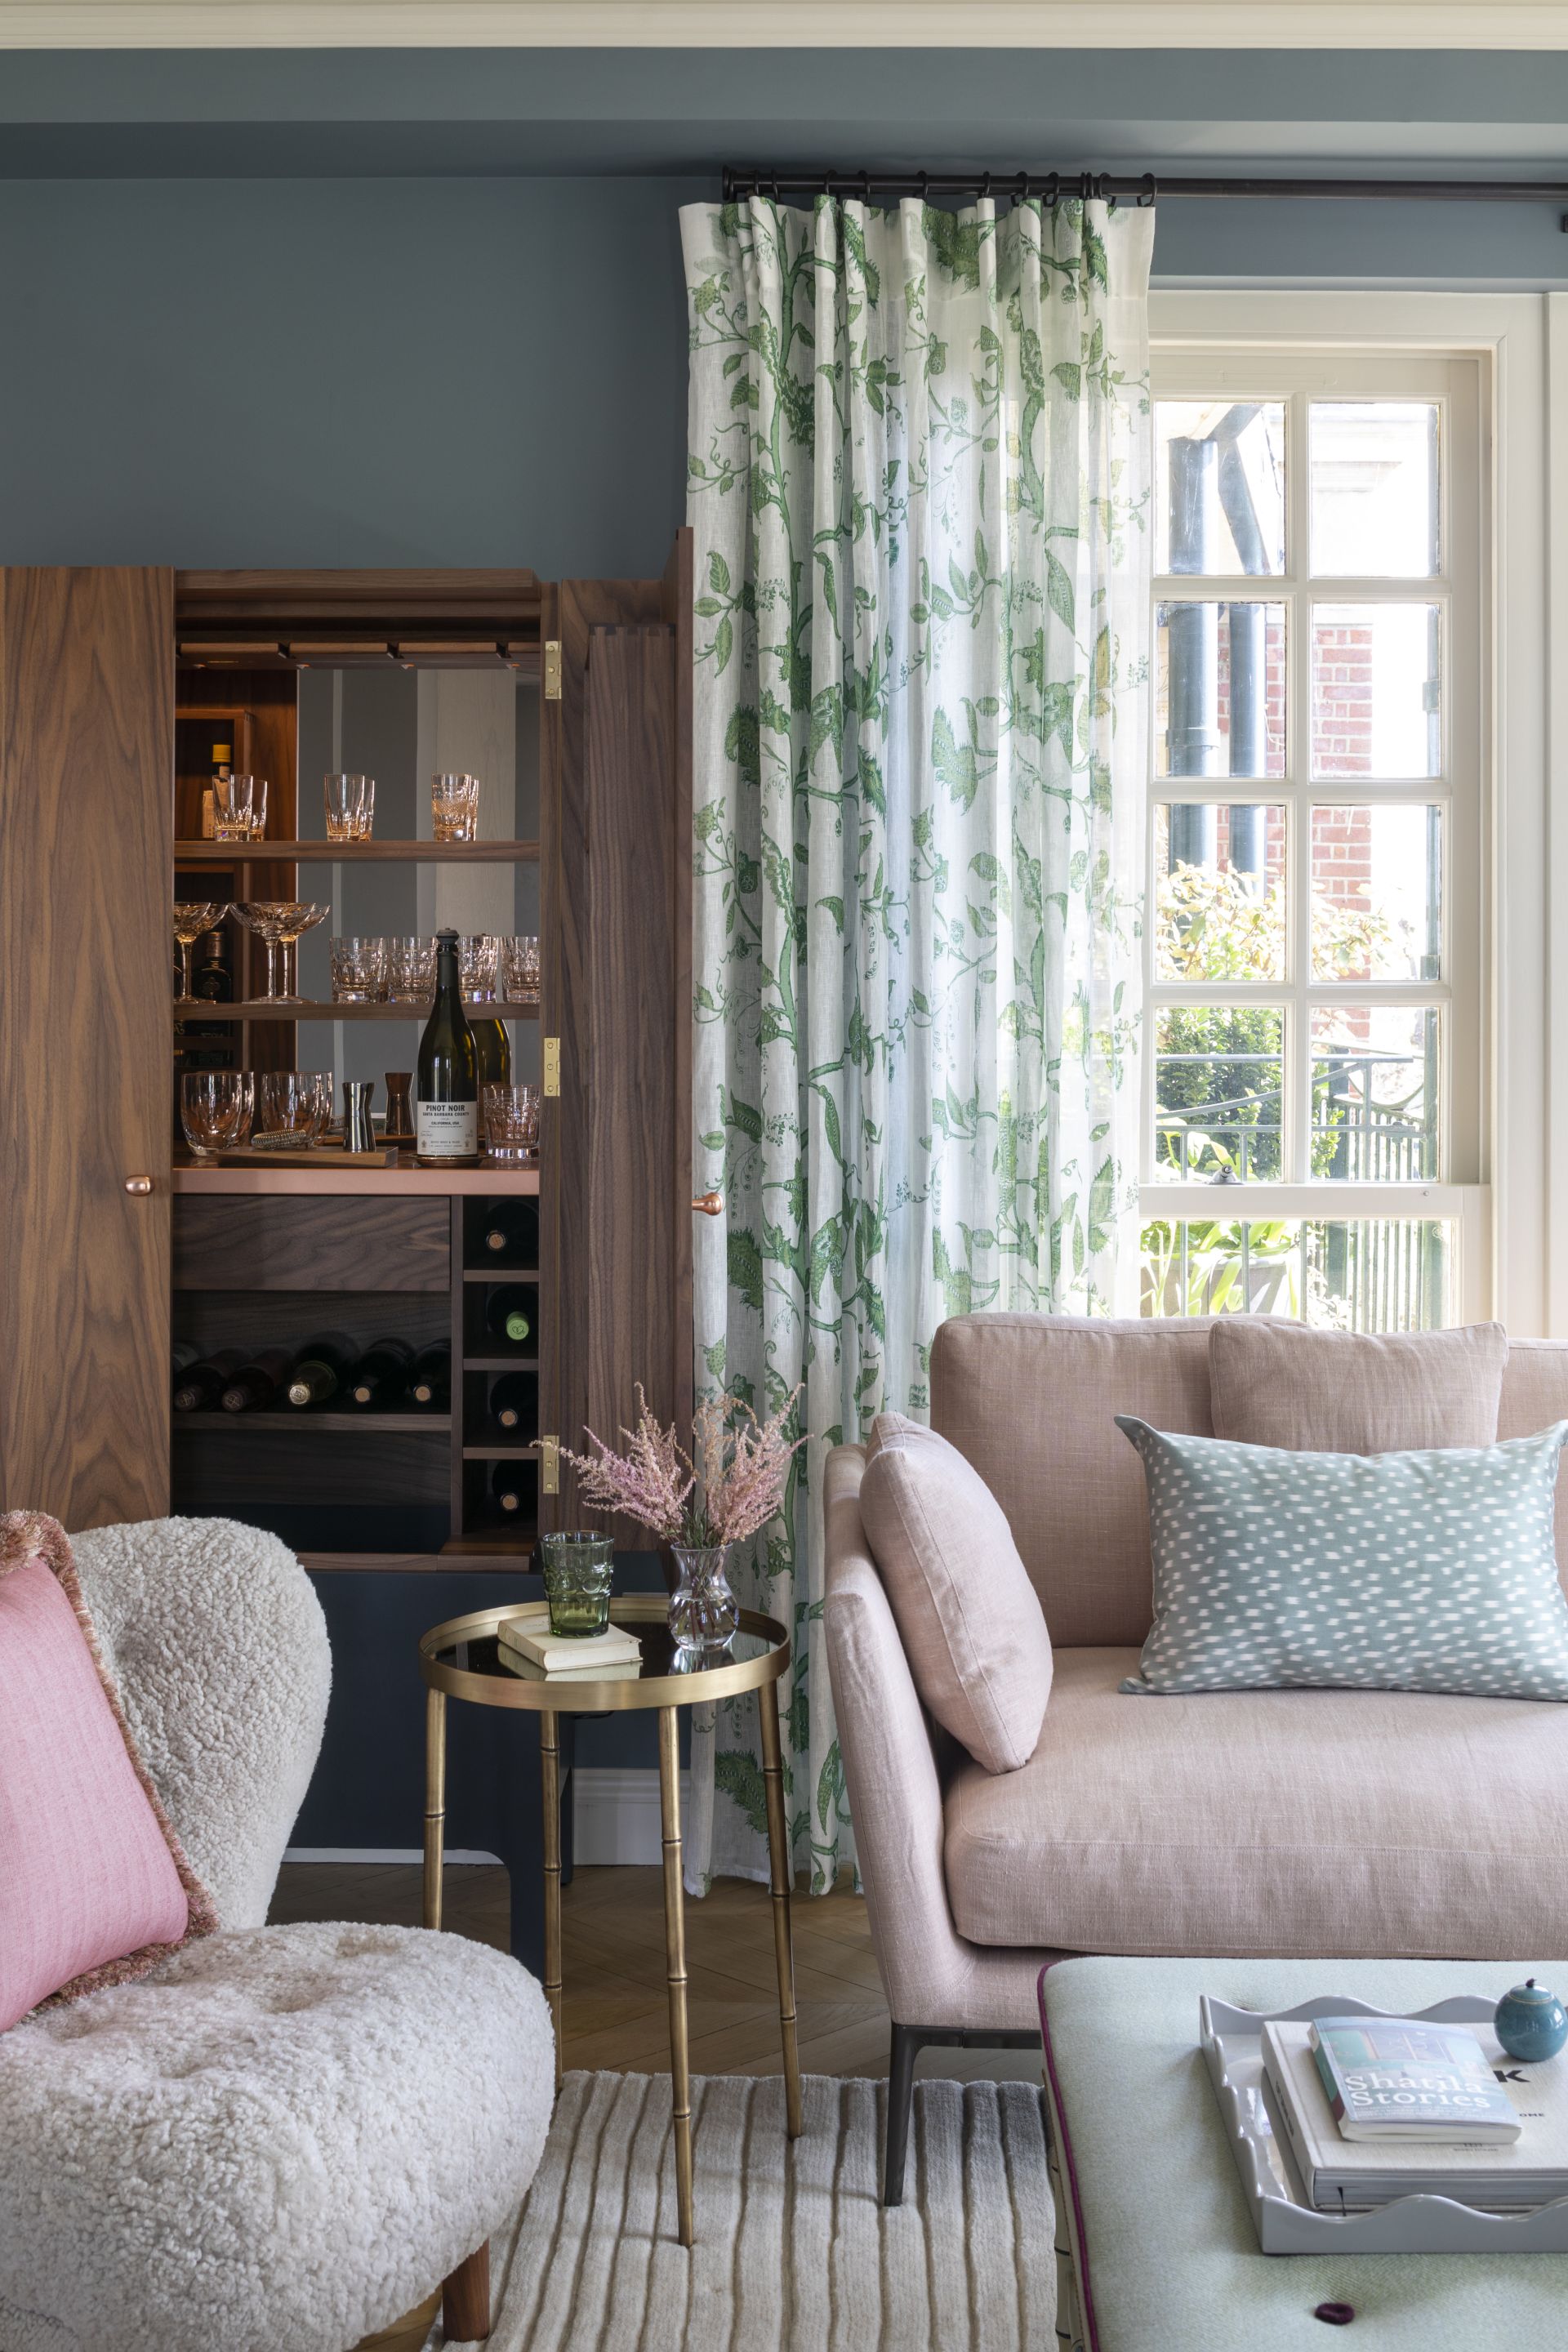 Living room makeover ideas on a budget – 10 statement tricks to spruce